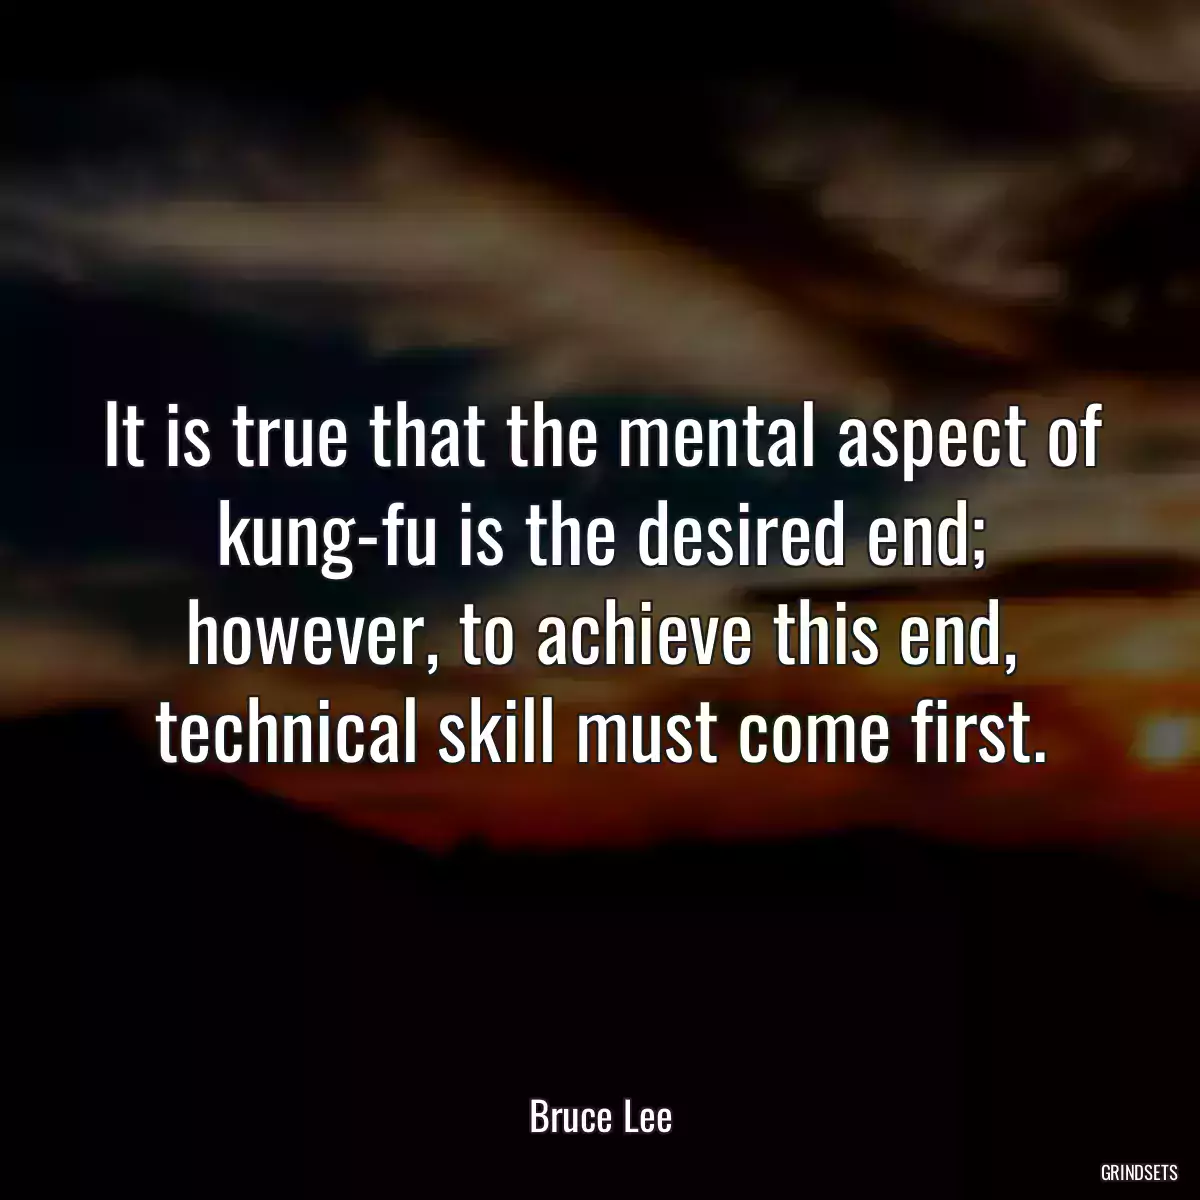 It is true that the mental aspect of kung-fu is the desired end; however, to achieve this end, technical skill must come first.